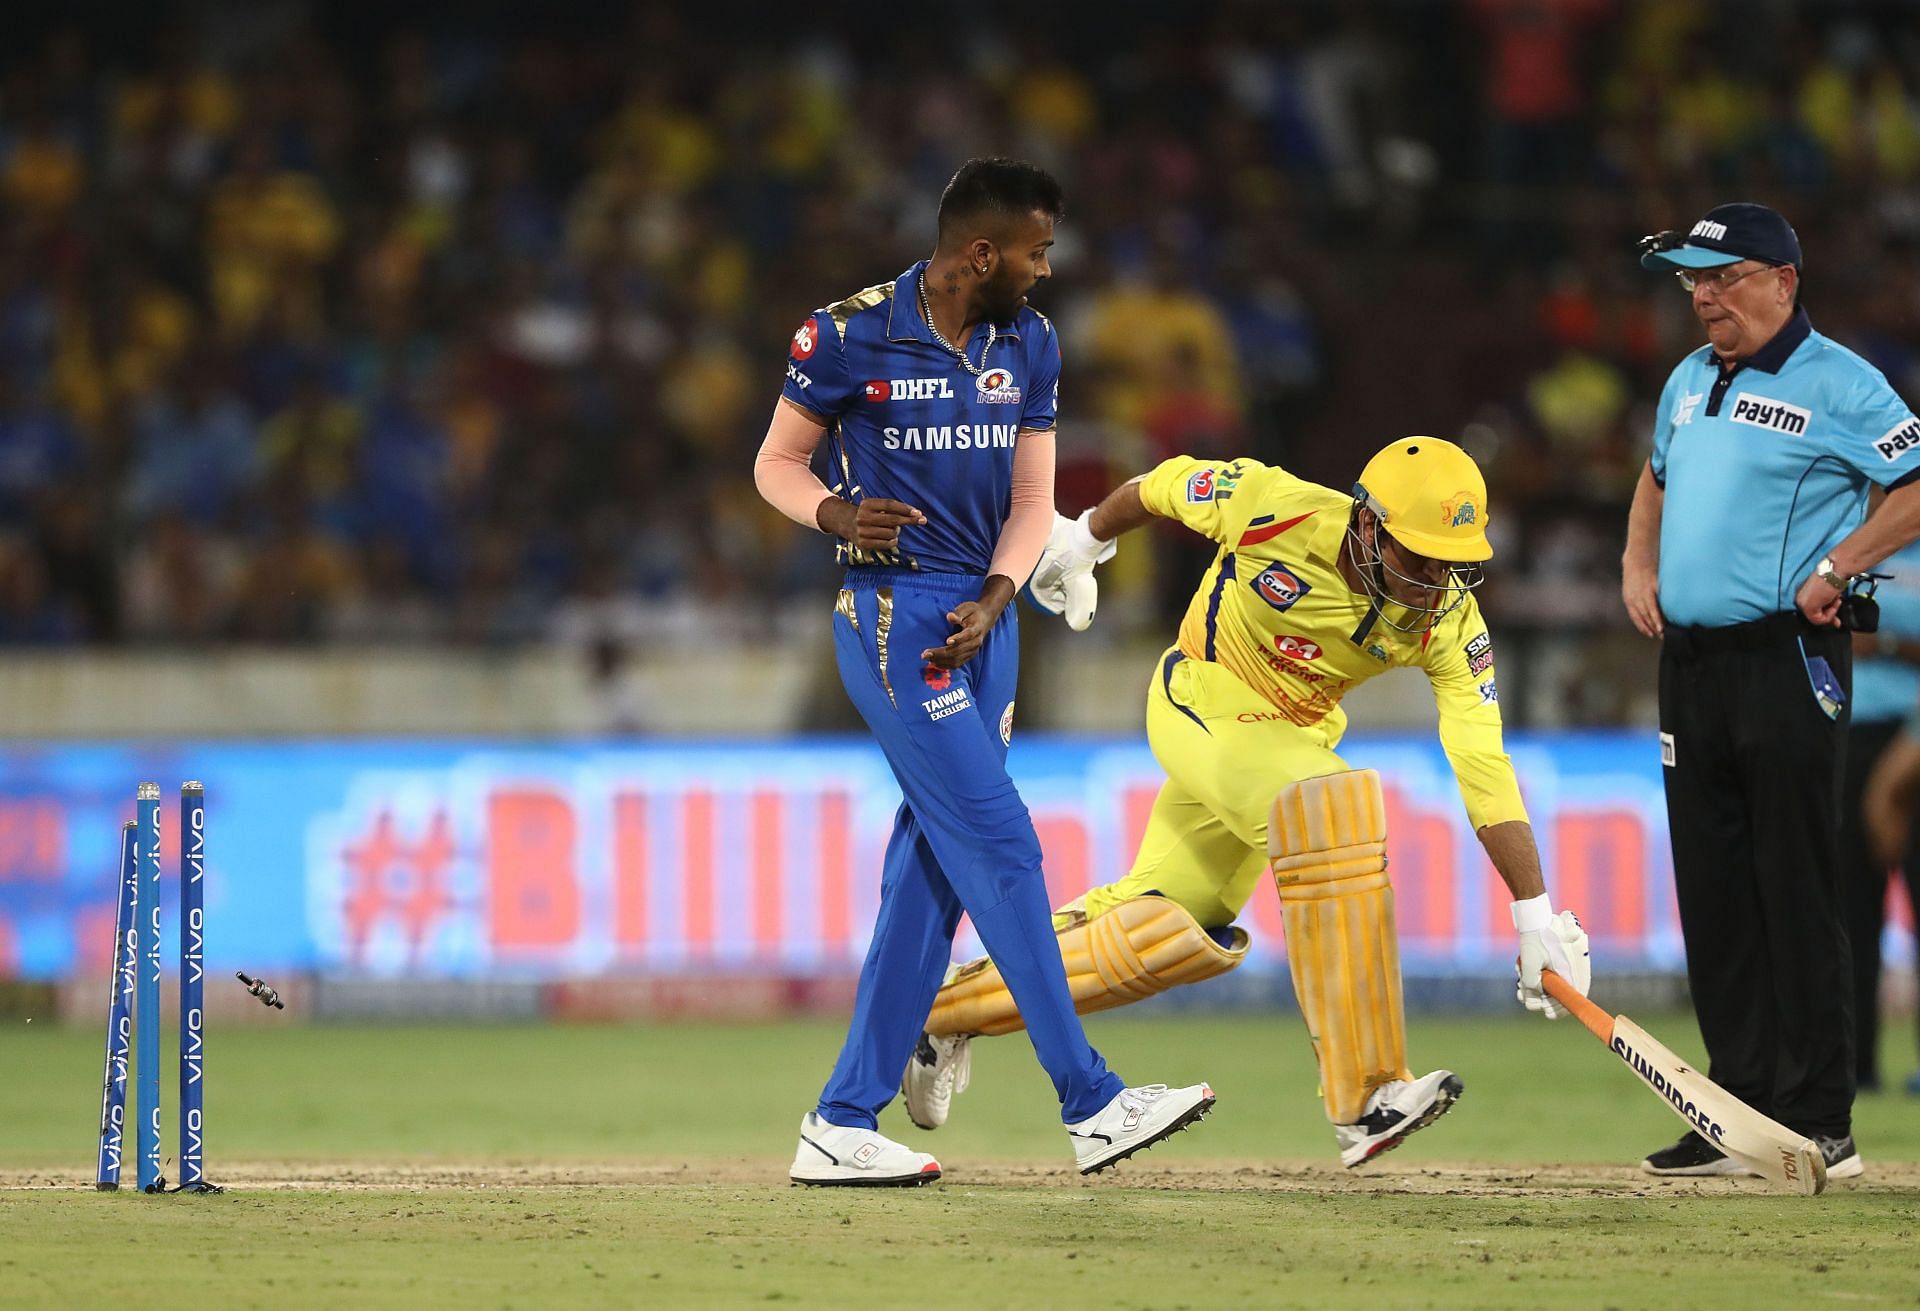 MS Dhoni was run out in the IPL 2019 final. (Credits: Getty)